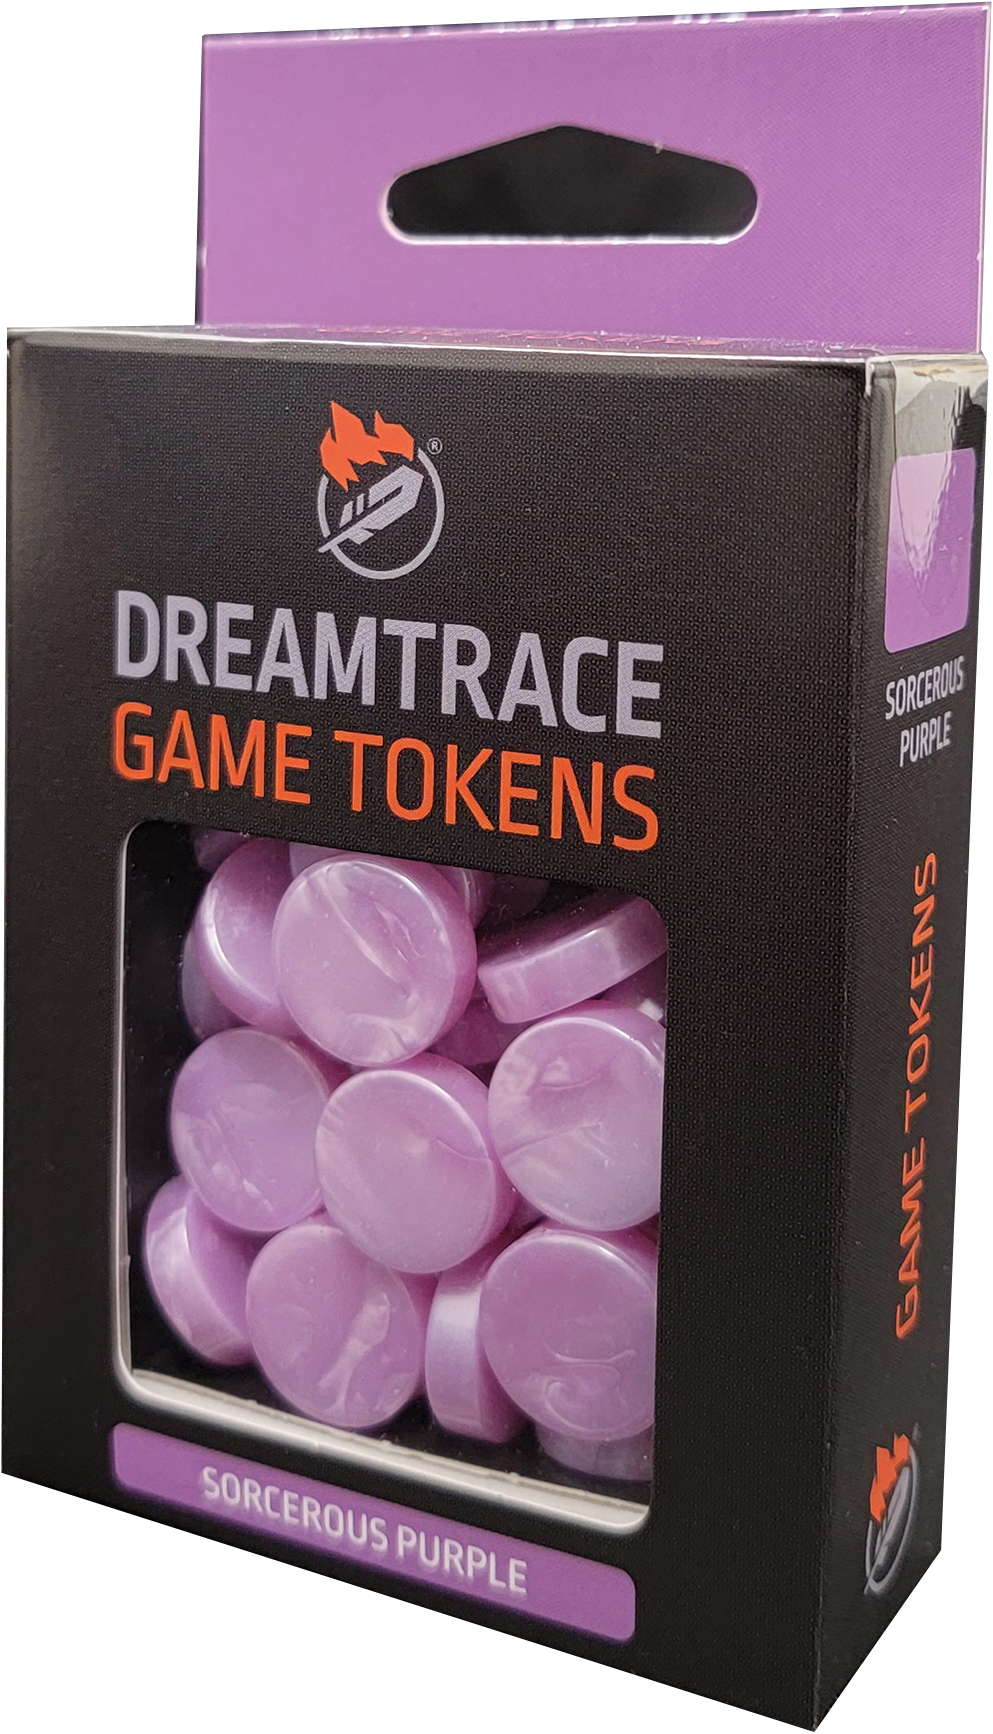 Dreamtrace Gaming Tokens: Sorcerous Purple 